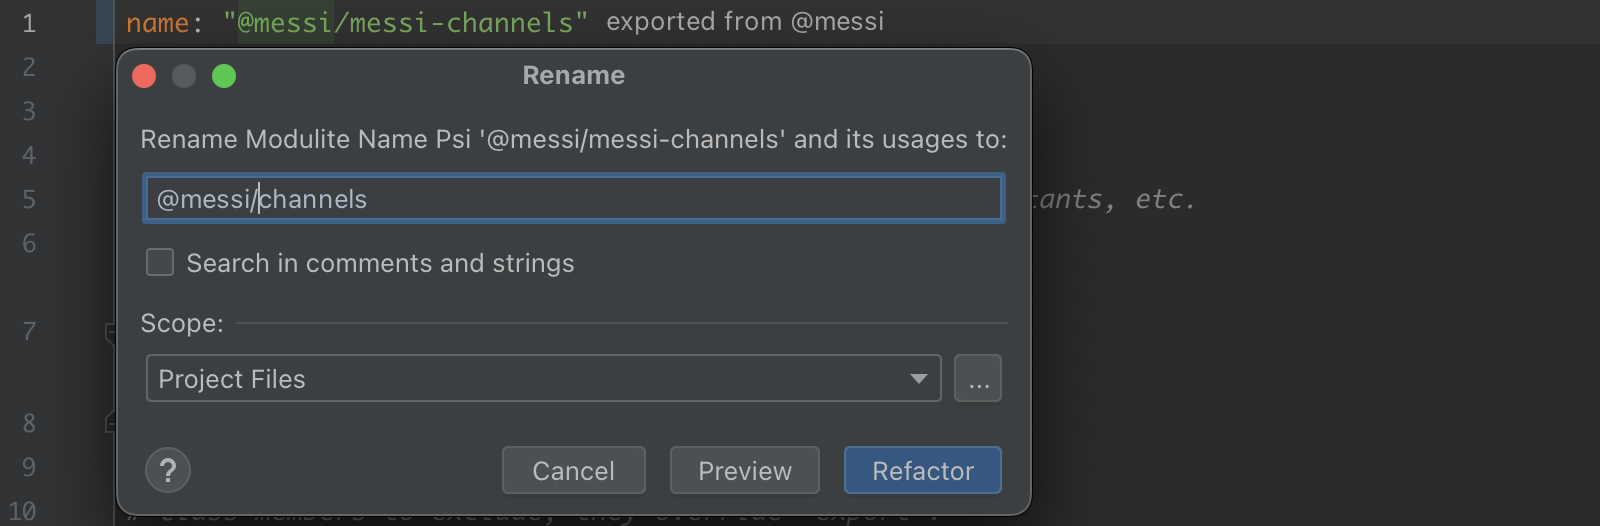 ui-messi-channel-rename